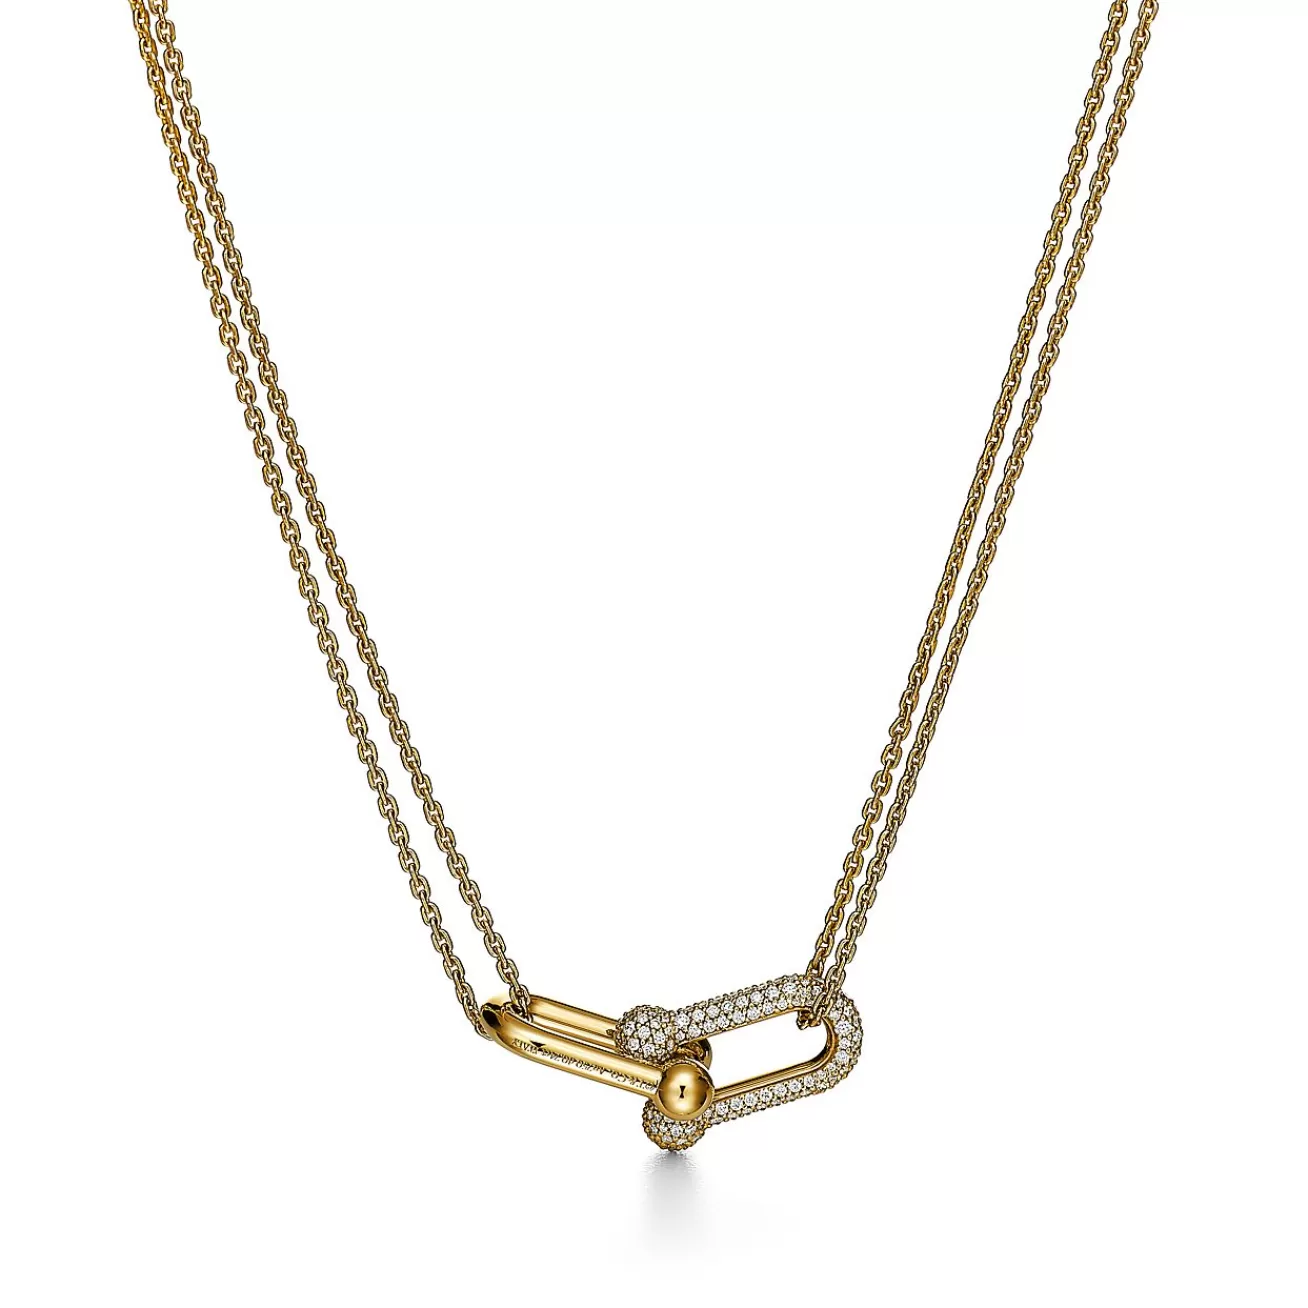 Tiffany & Co. Tiffany HardWear Large Double Link Pendant in Yellow Gold with Pavé Diamonds | ^ Necklaces & Pendants | Gold Jewelry